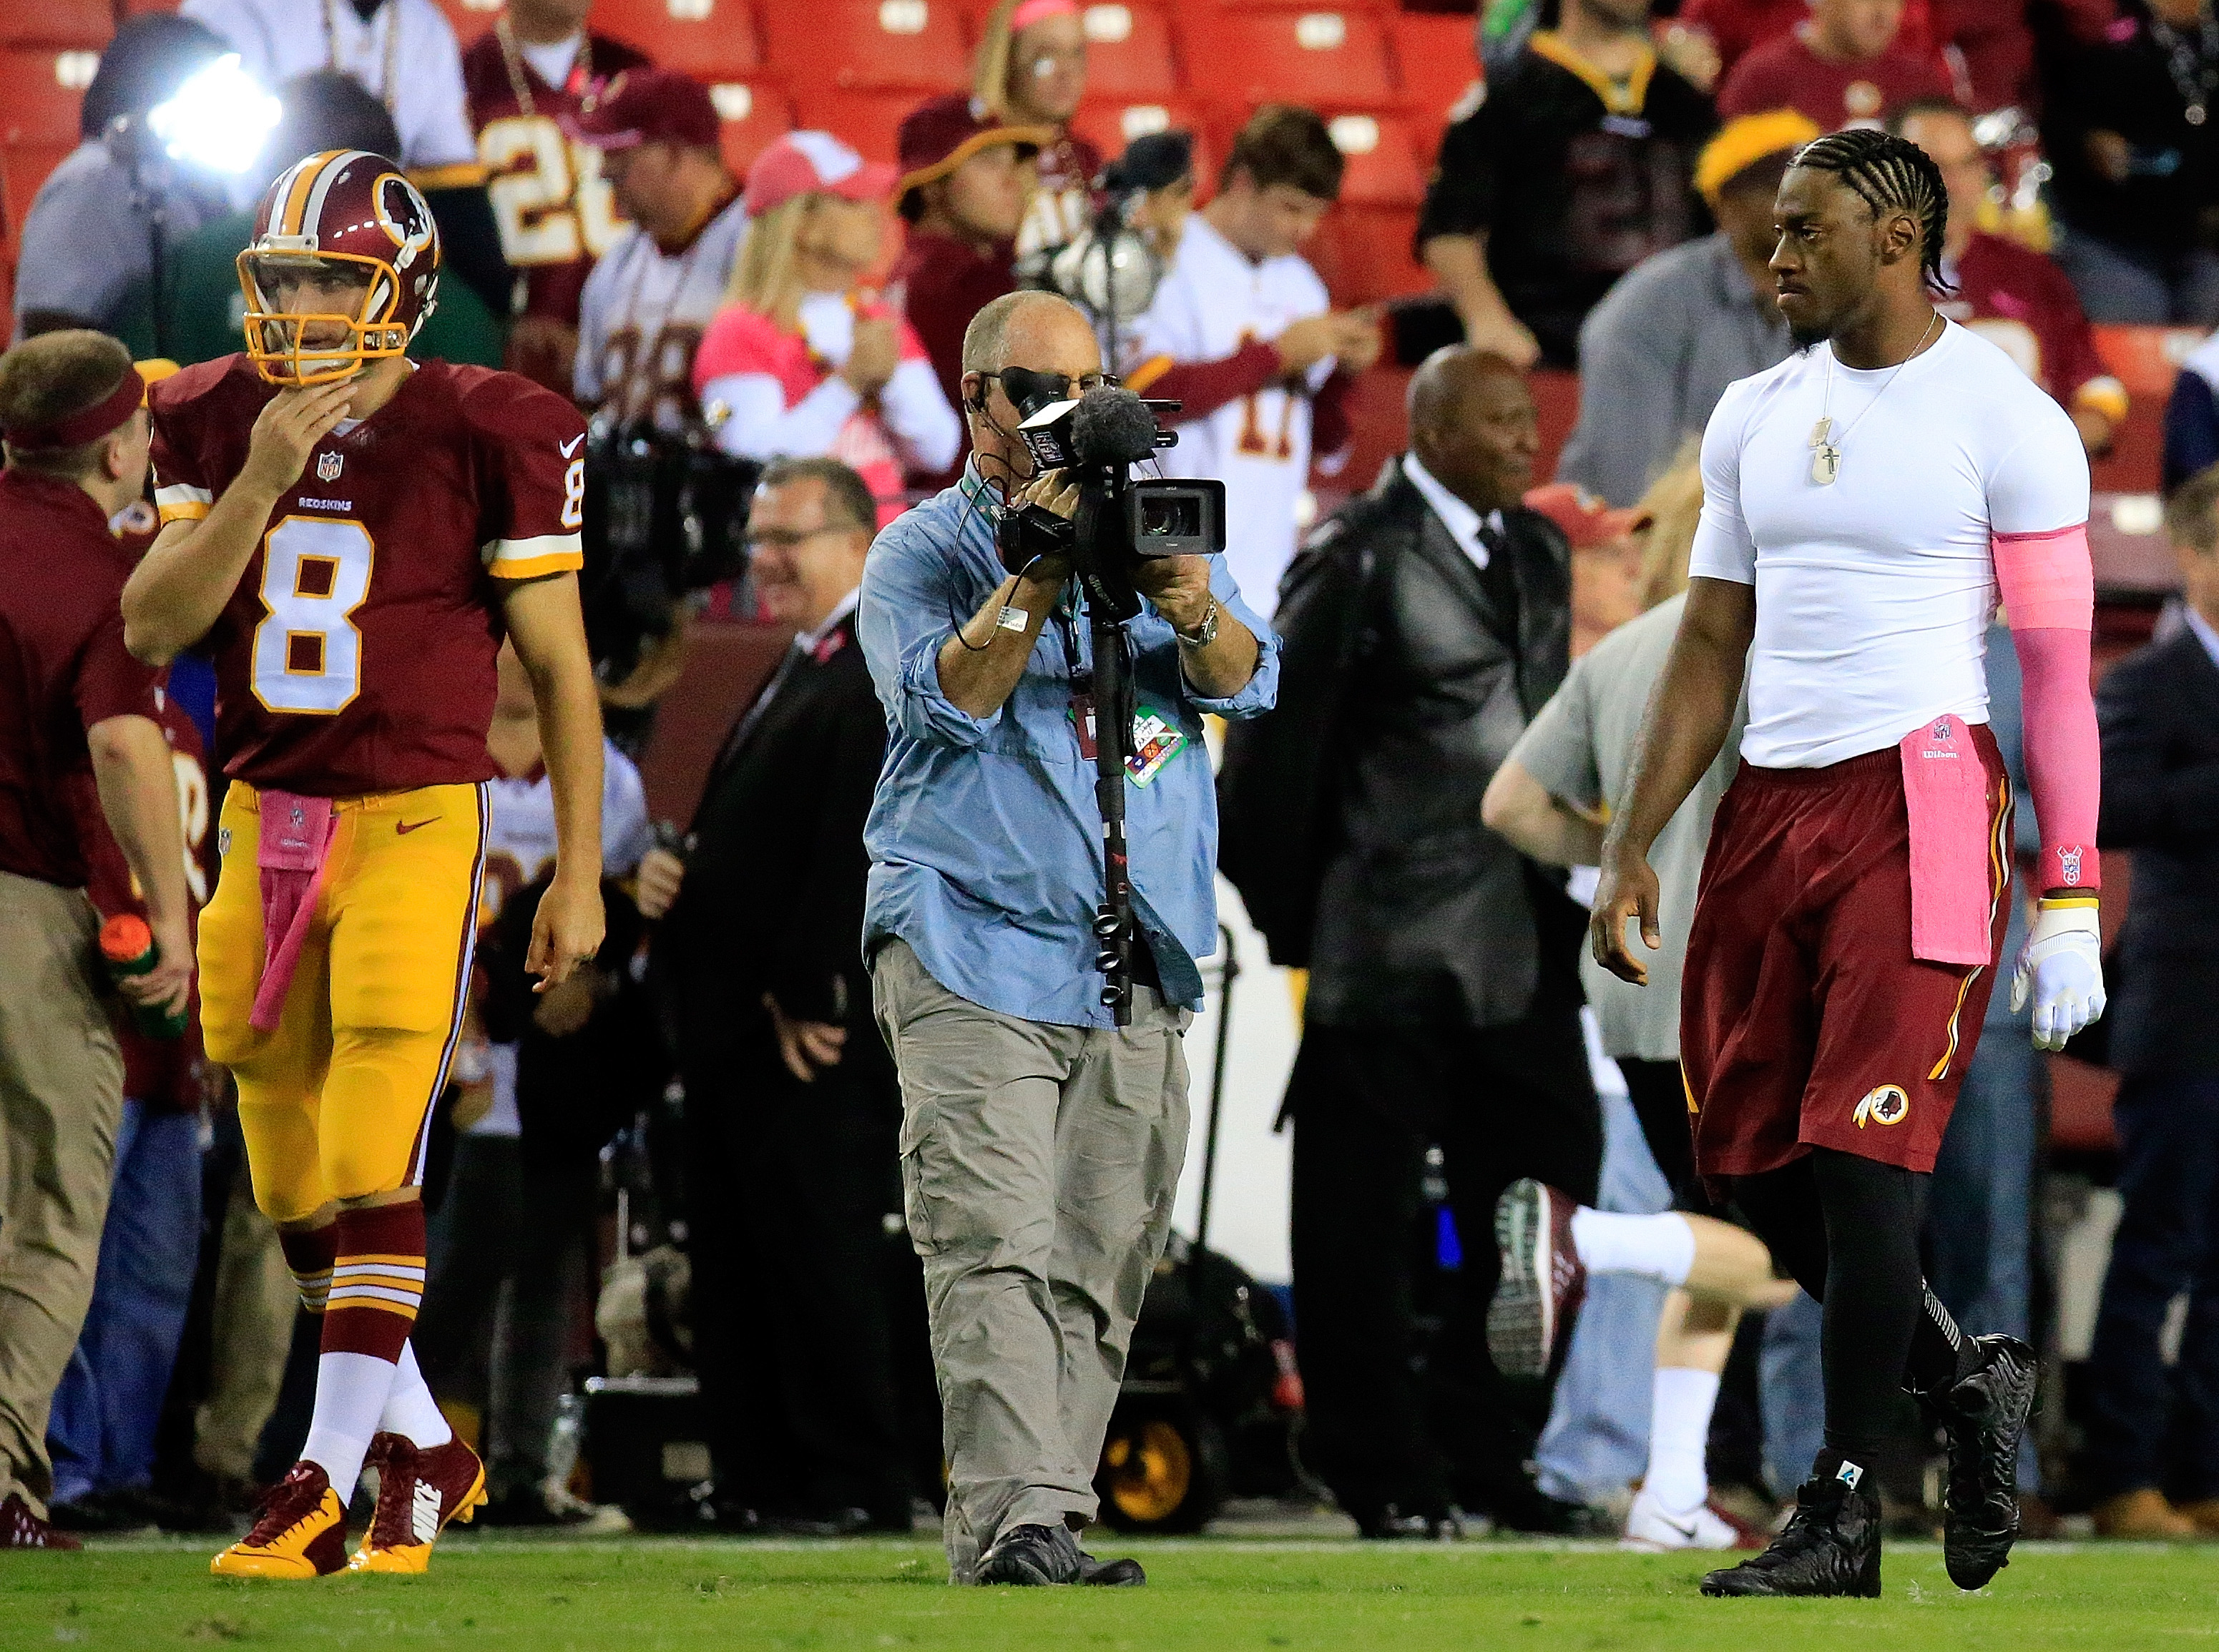 A tale of two Tampas: How one opponent sorted out the Redskins QB position